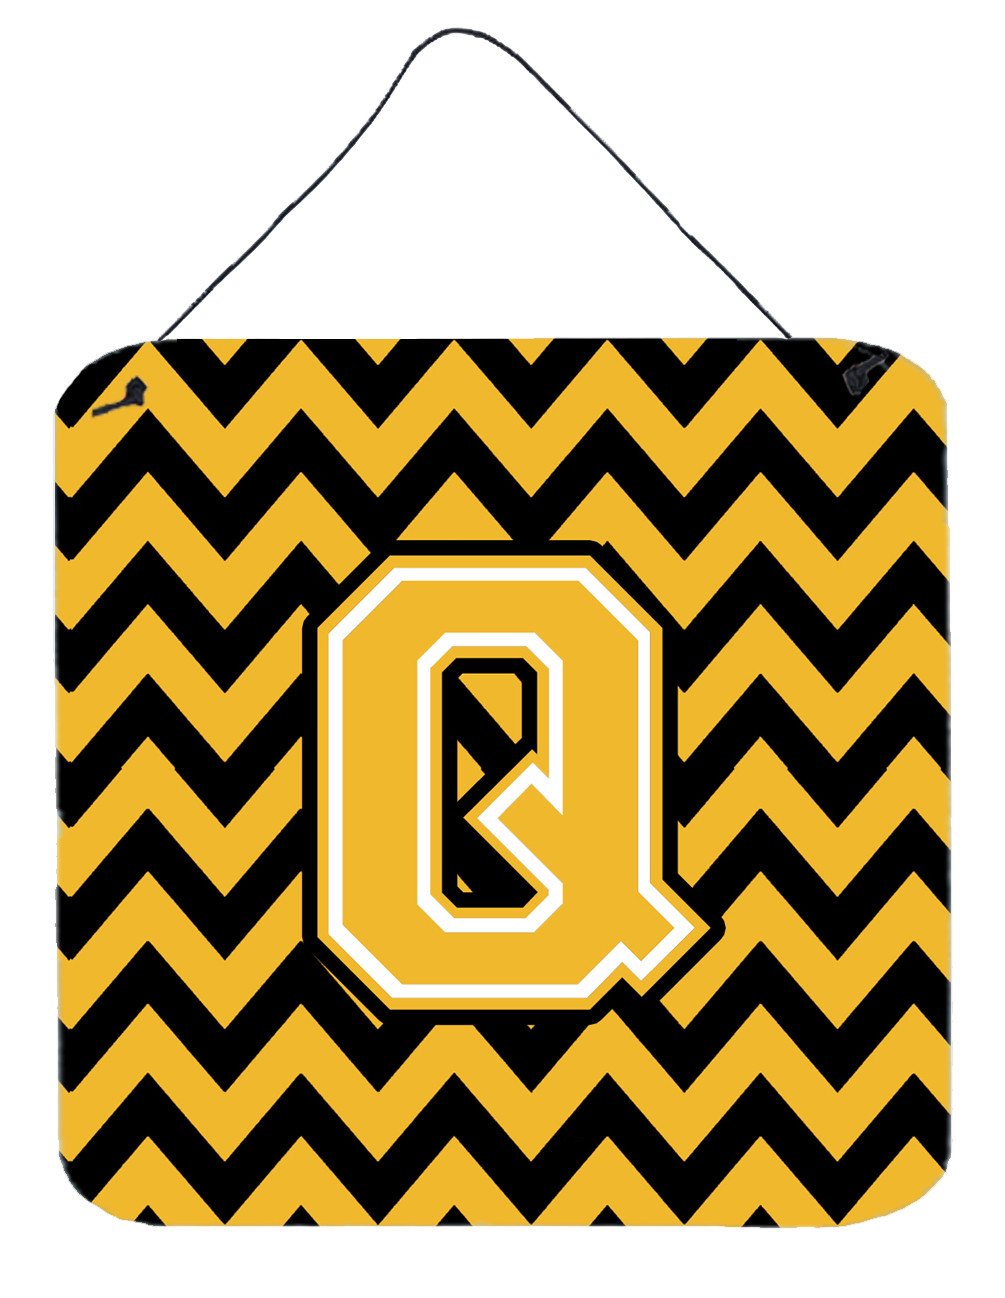 Letter Q Chevron Black and Gold Wall or Door Hanging Prints CJ1053-QDS66 by Caroline's Treasures